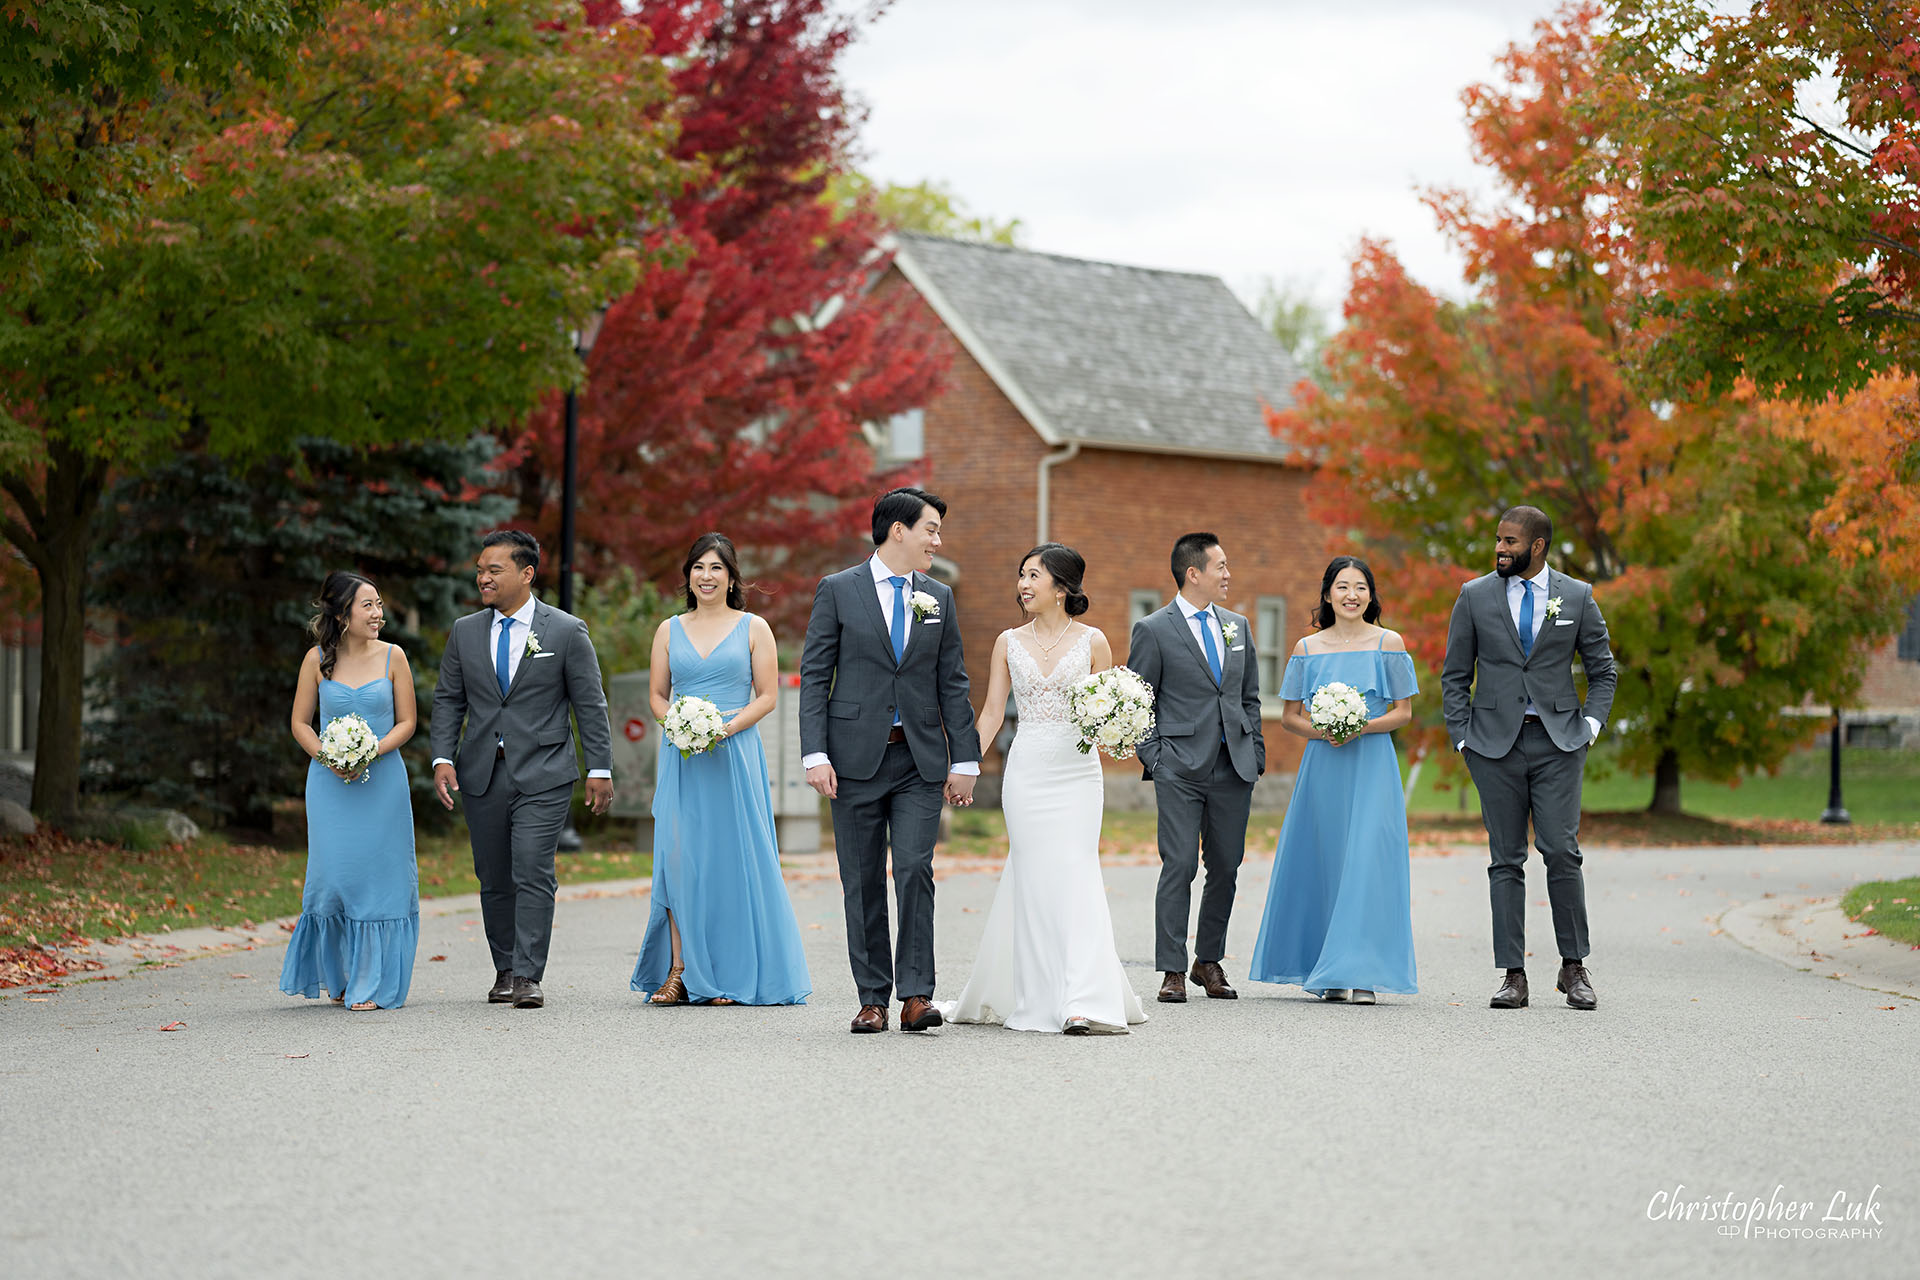 Bride Groom Groomsmen Bridesmaids Bridal Wedding Party Group Photo Crop Autumn Fall Leaves Walking Together Candid Natural Organic Photojournalistic